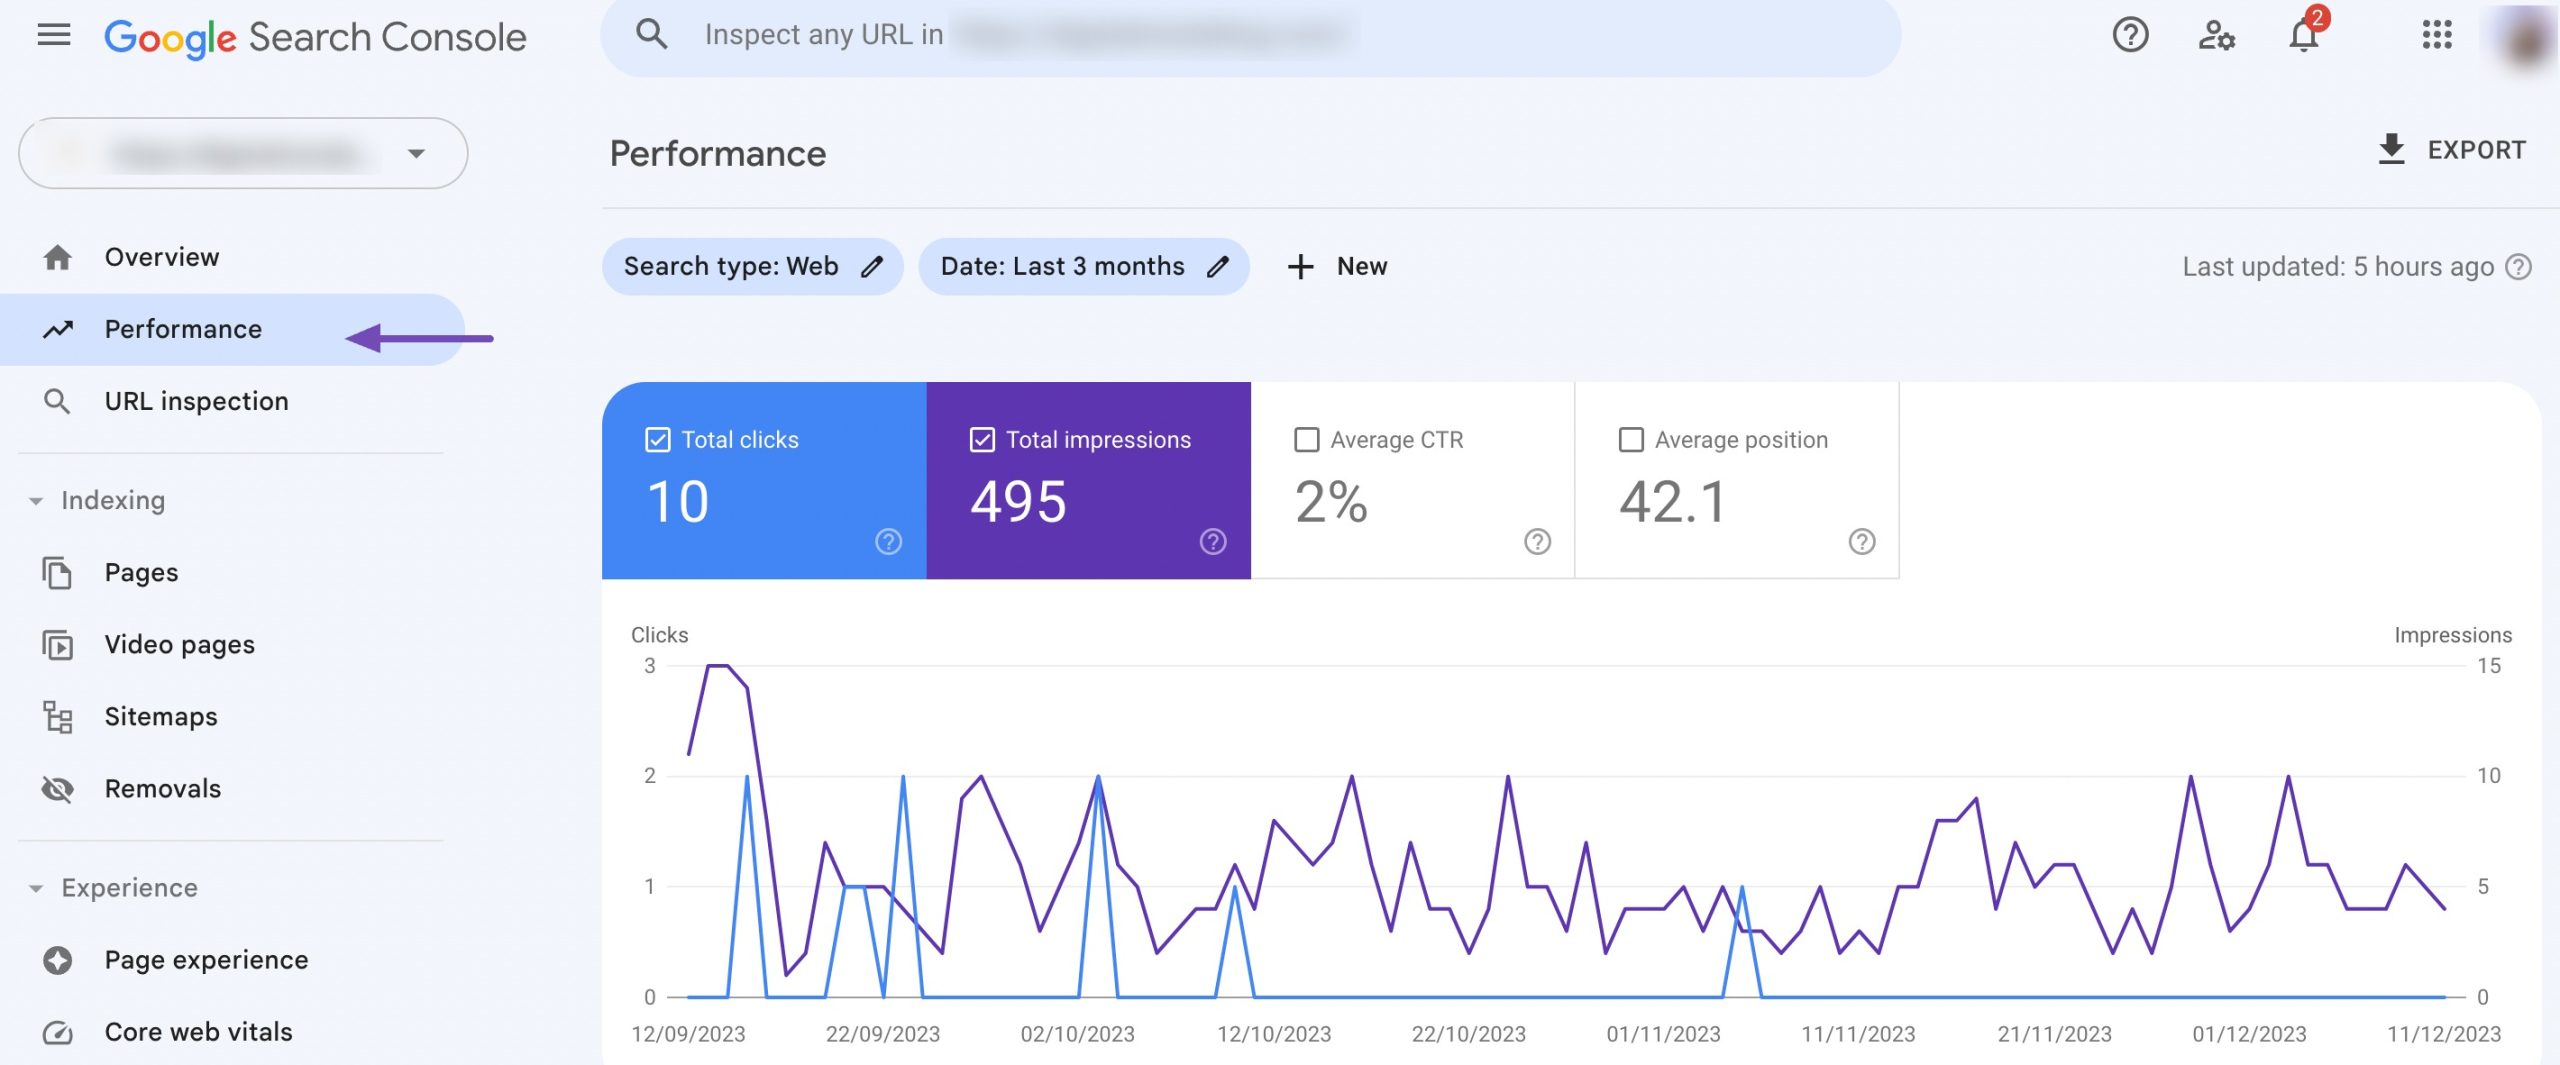 Content gap analysis using Google Search Console